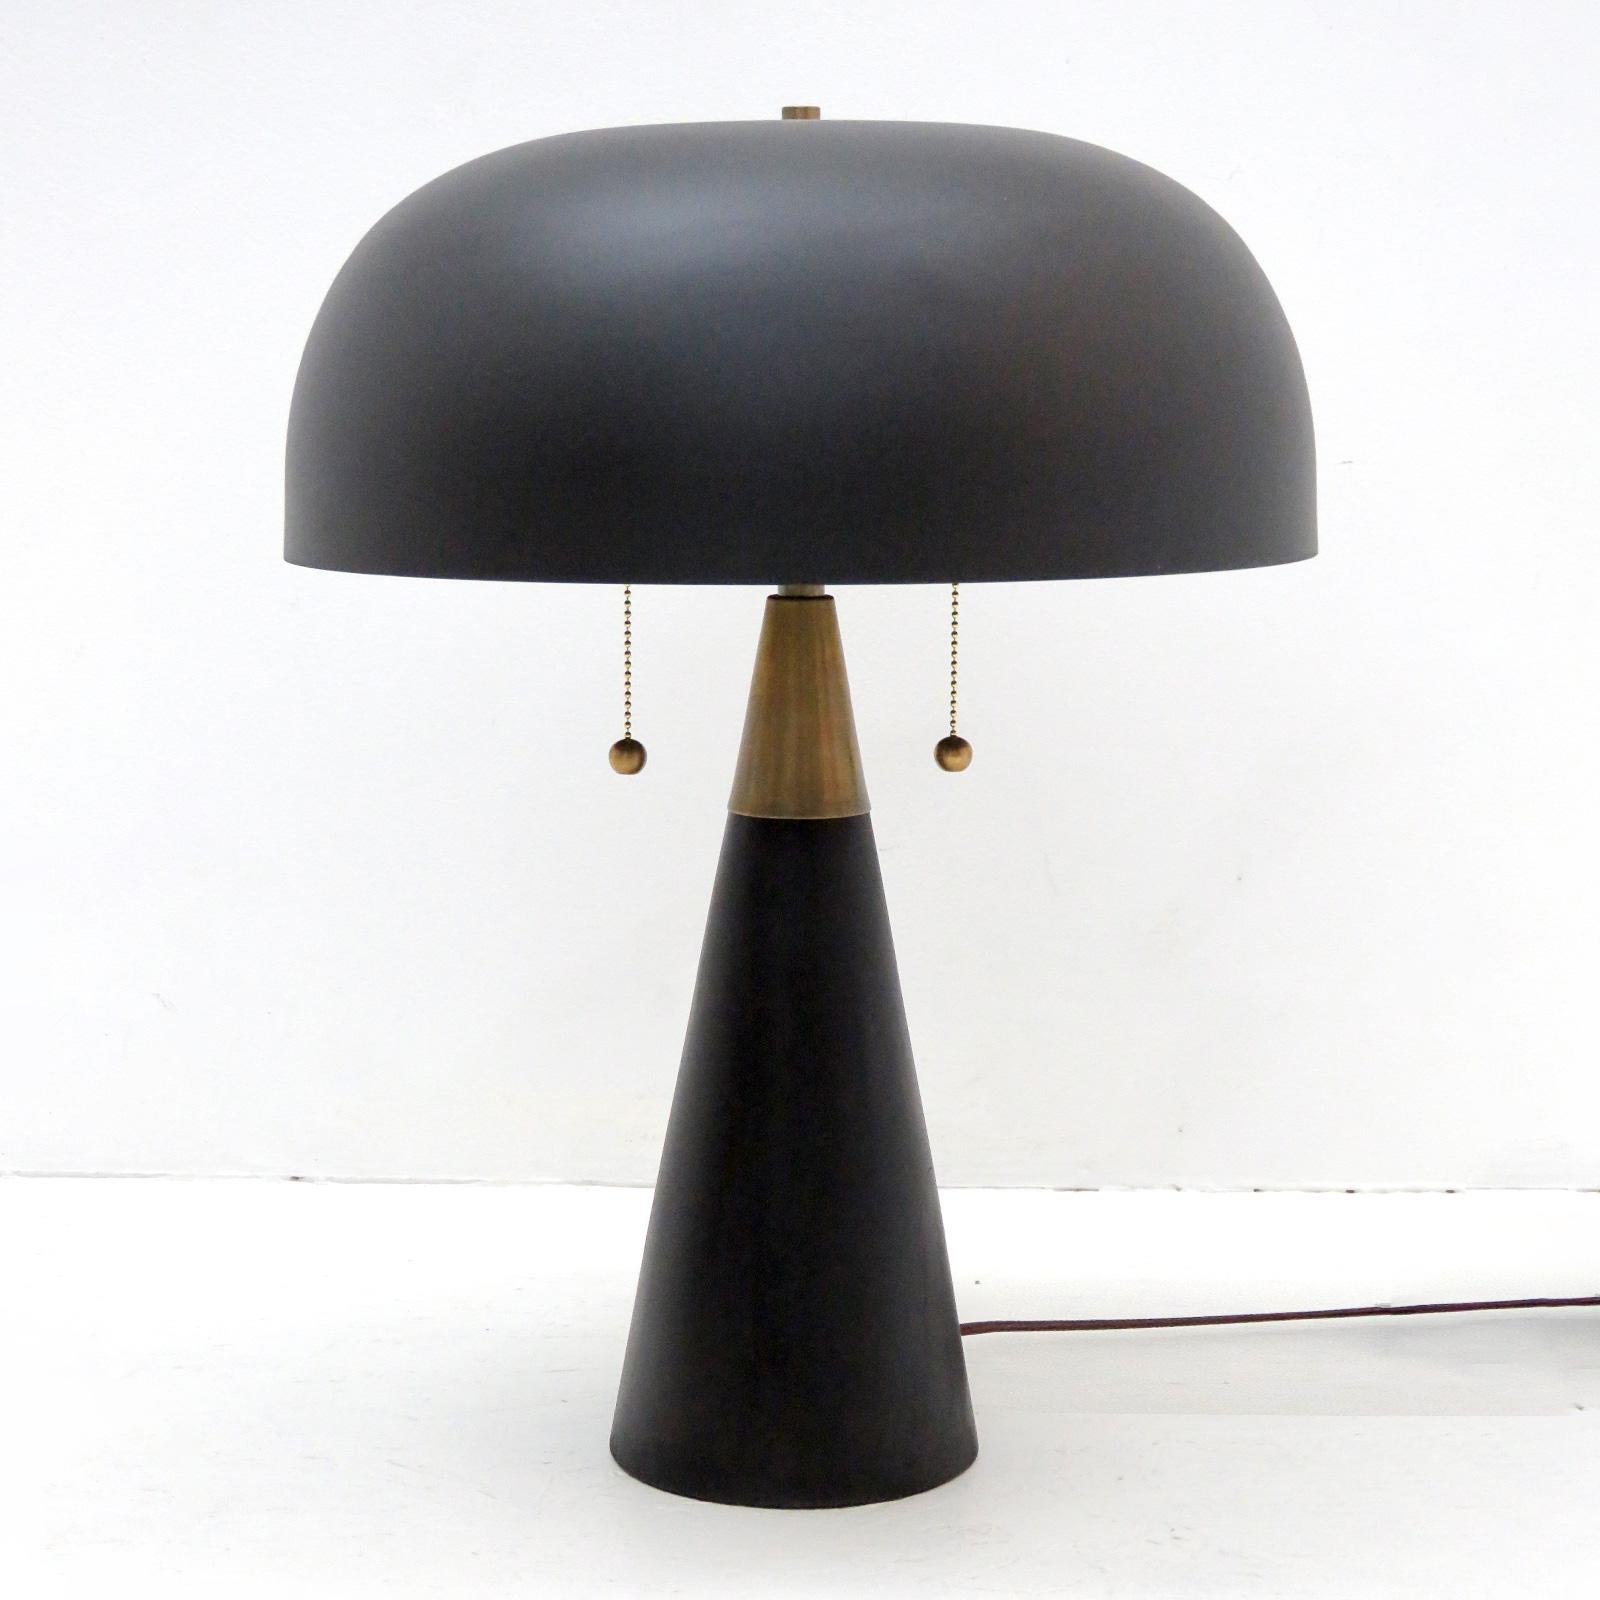 Wonderful organic modern table lamps by Alvaro Benitez for Gallery L7, with a blackened wood base, a large black powder-coated metal shade and brass hardware. Dual bulb setup with two individual pull switches and a general in-line on/off switch. Two